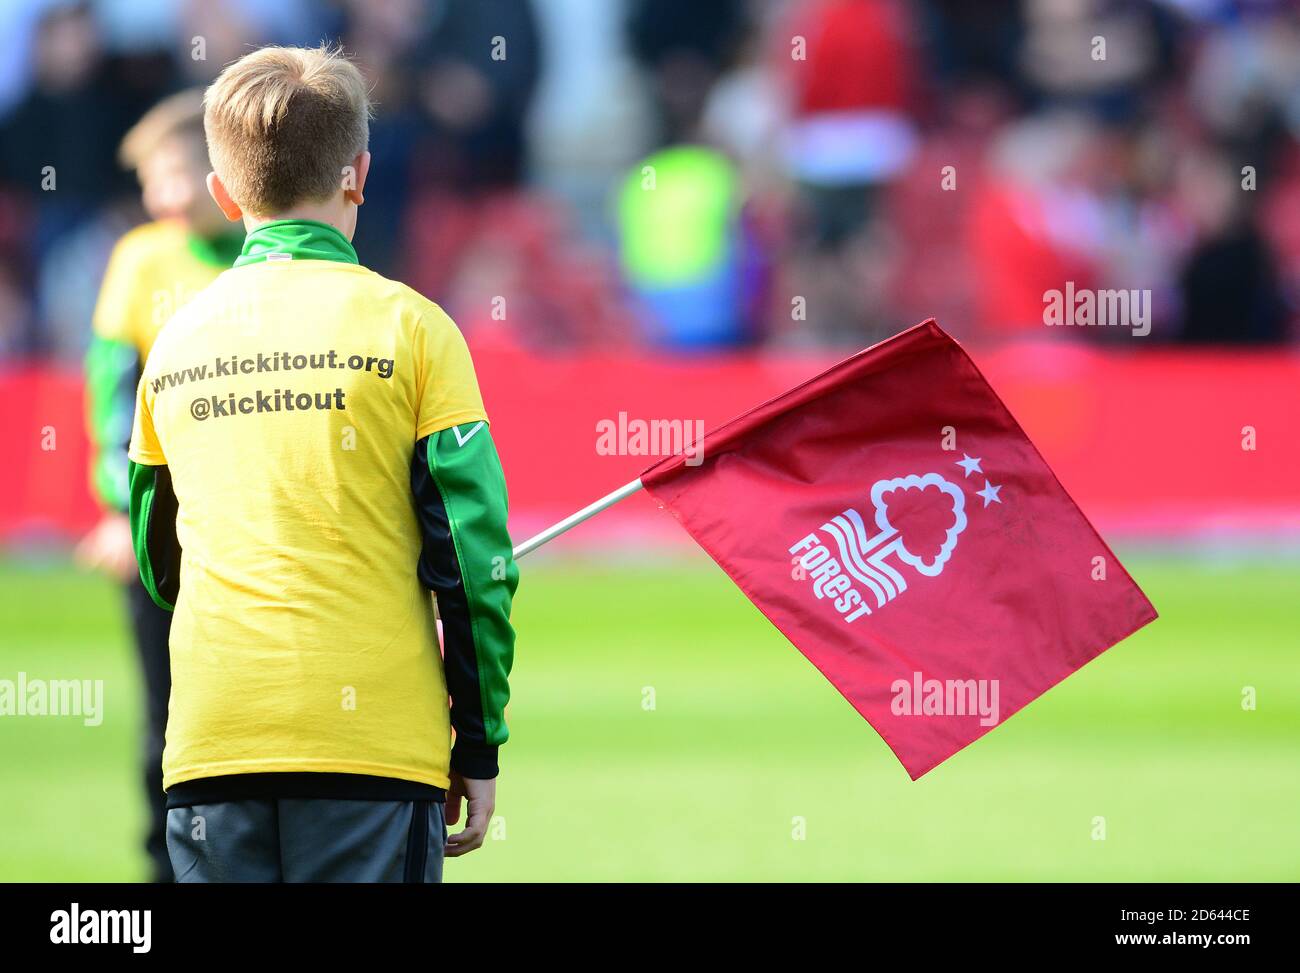 A child wearing a Kick It Out anti-rascism t-shirt holding a Nottingham Forest flag Stock Photo